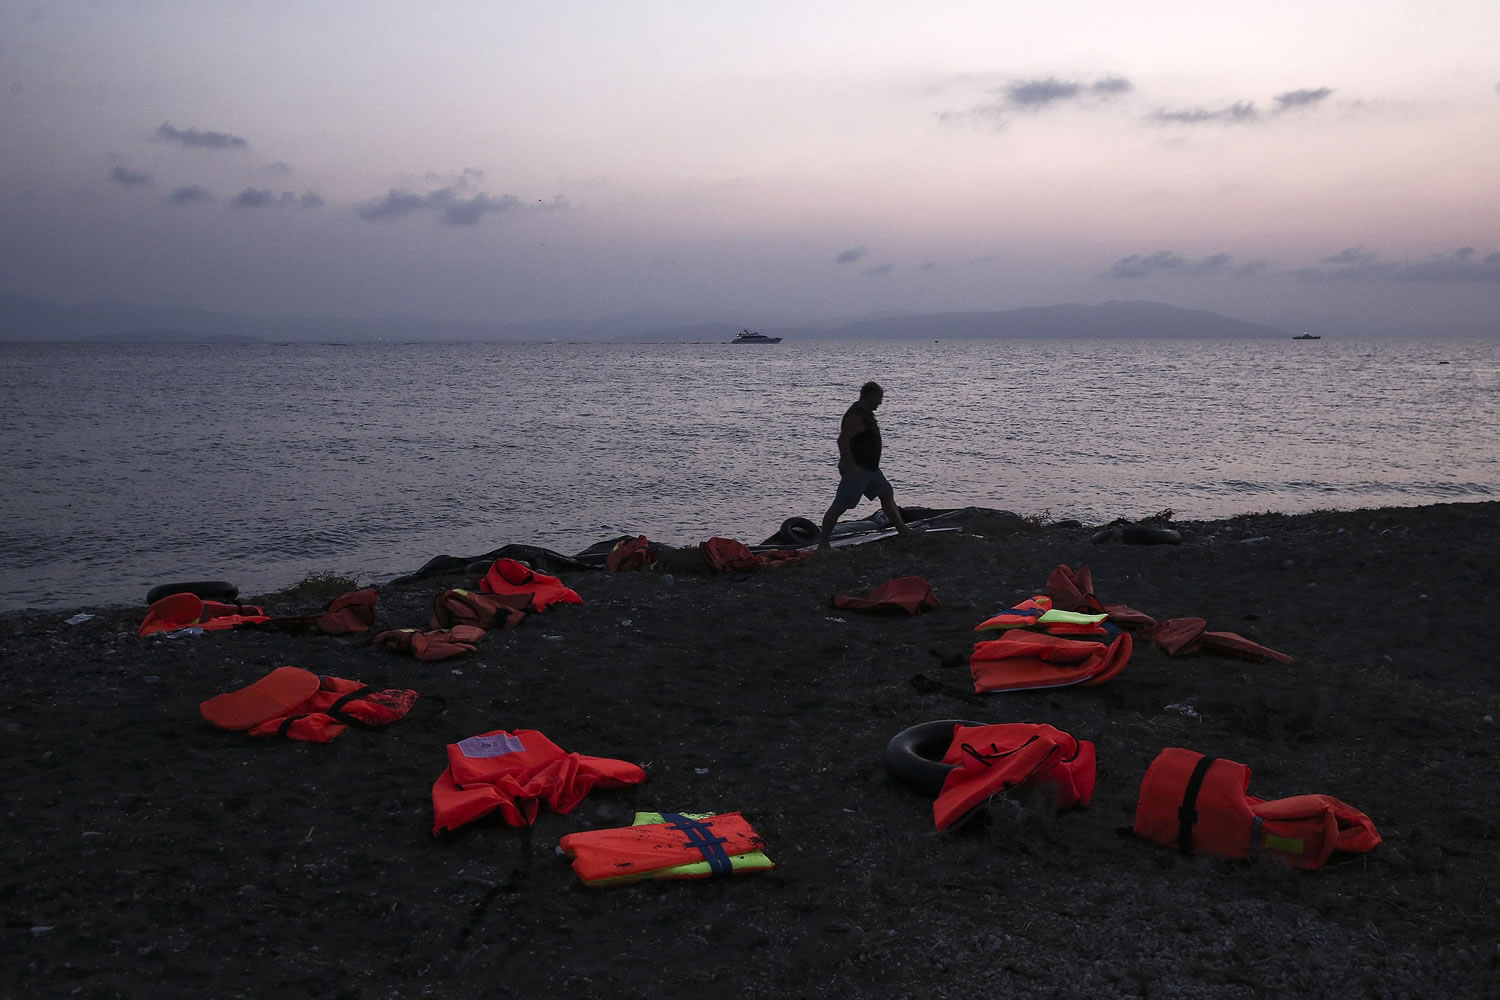 A man walks amid life vests which have been left by migrants after disembarking at a coast on the southeastern island of Kos, Greece, on Tuesday.